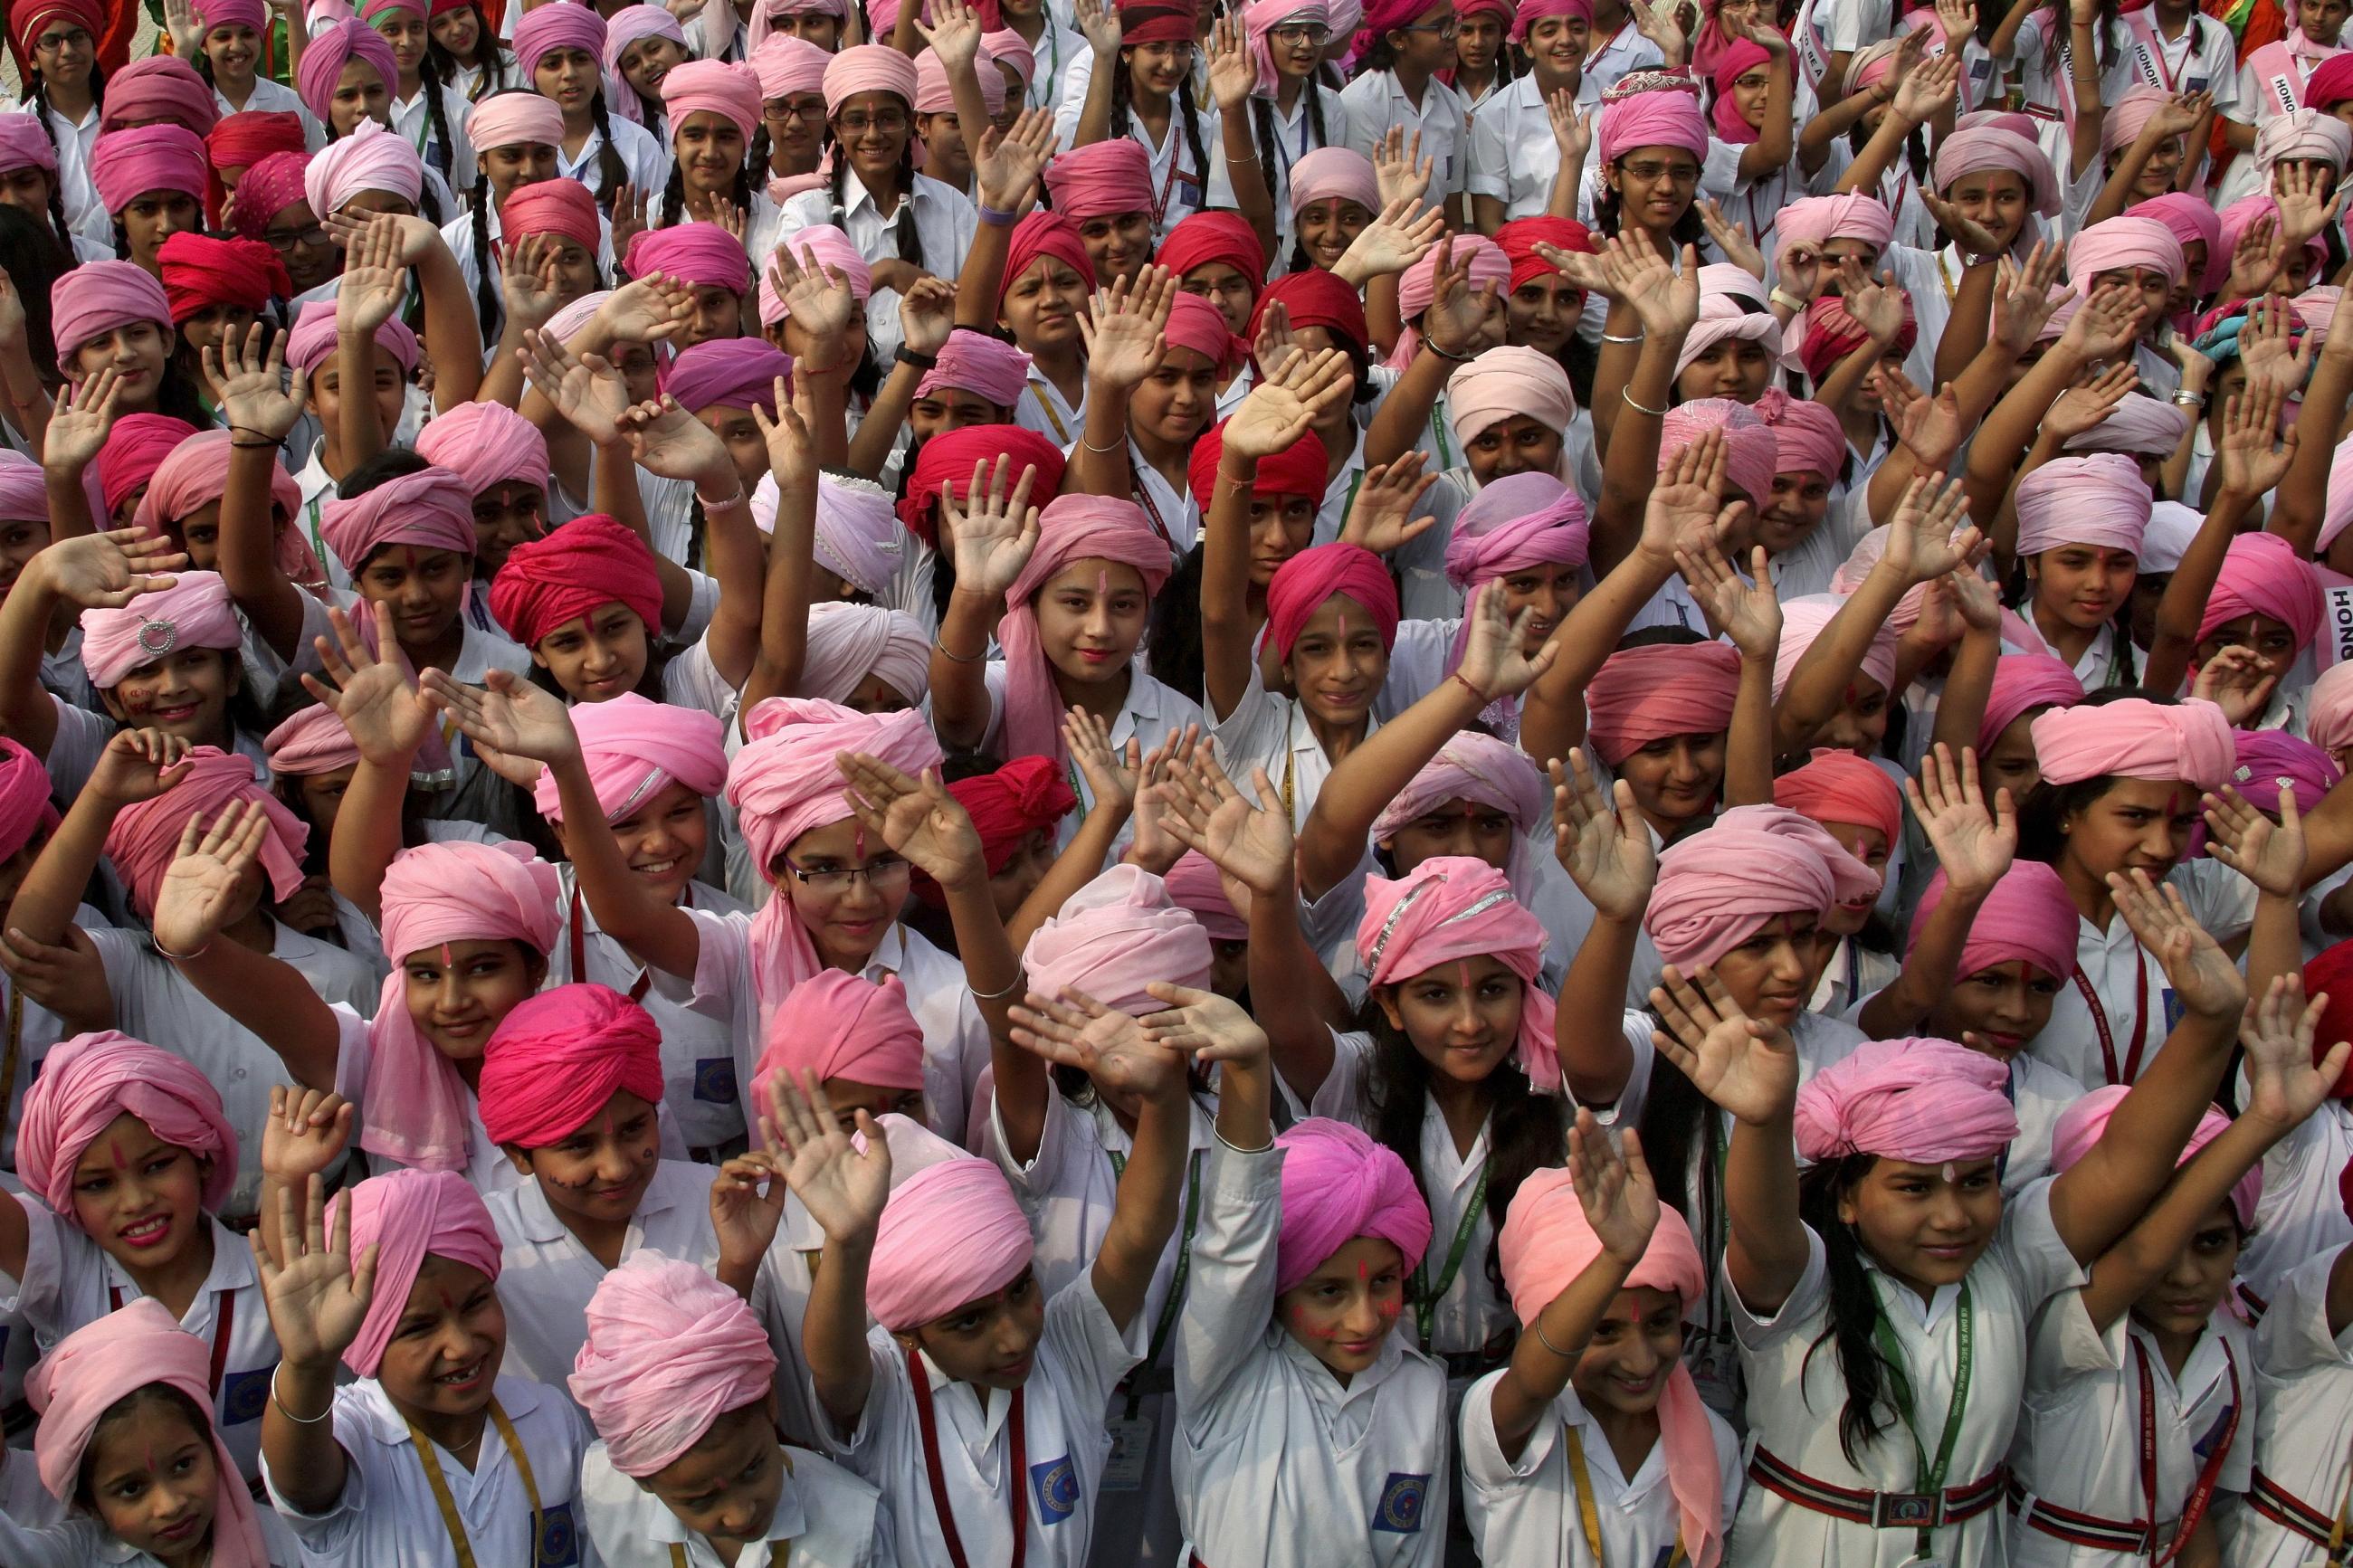 Girls wave as they take part in celebrations to mark the International Day of the Girl Child at a school in Chandigarh, India, on October 12, 2015. 